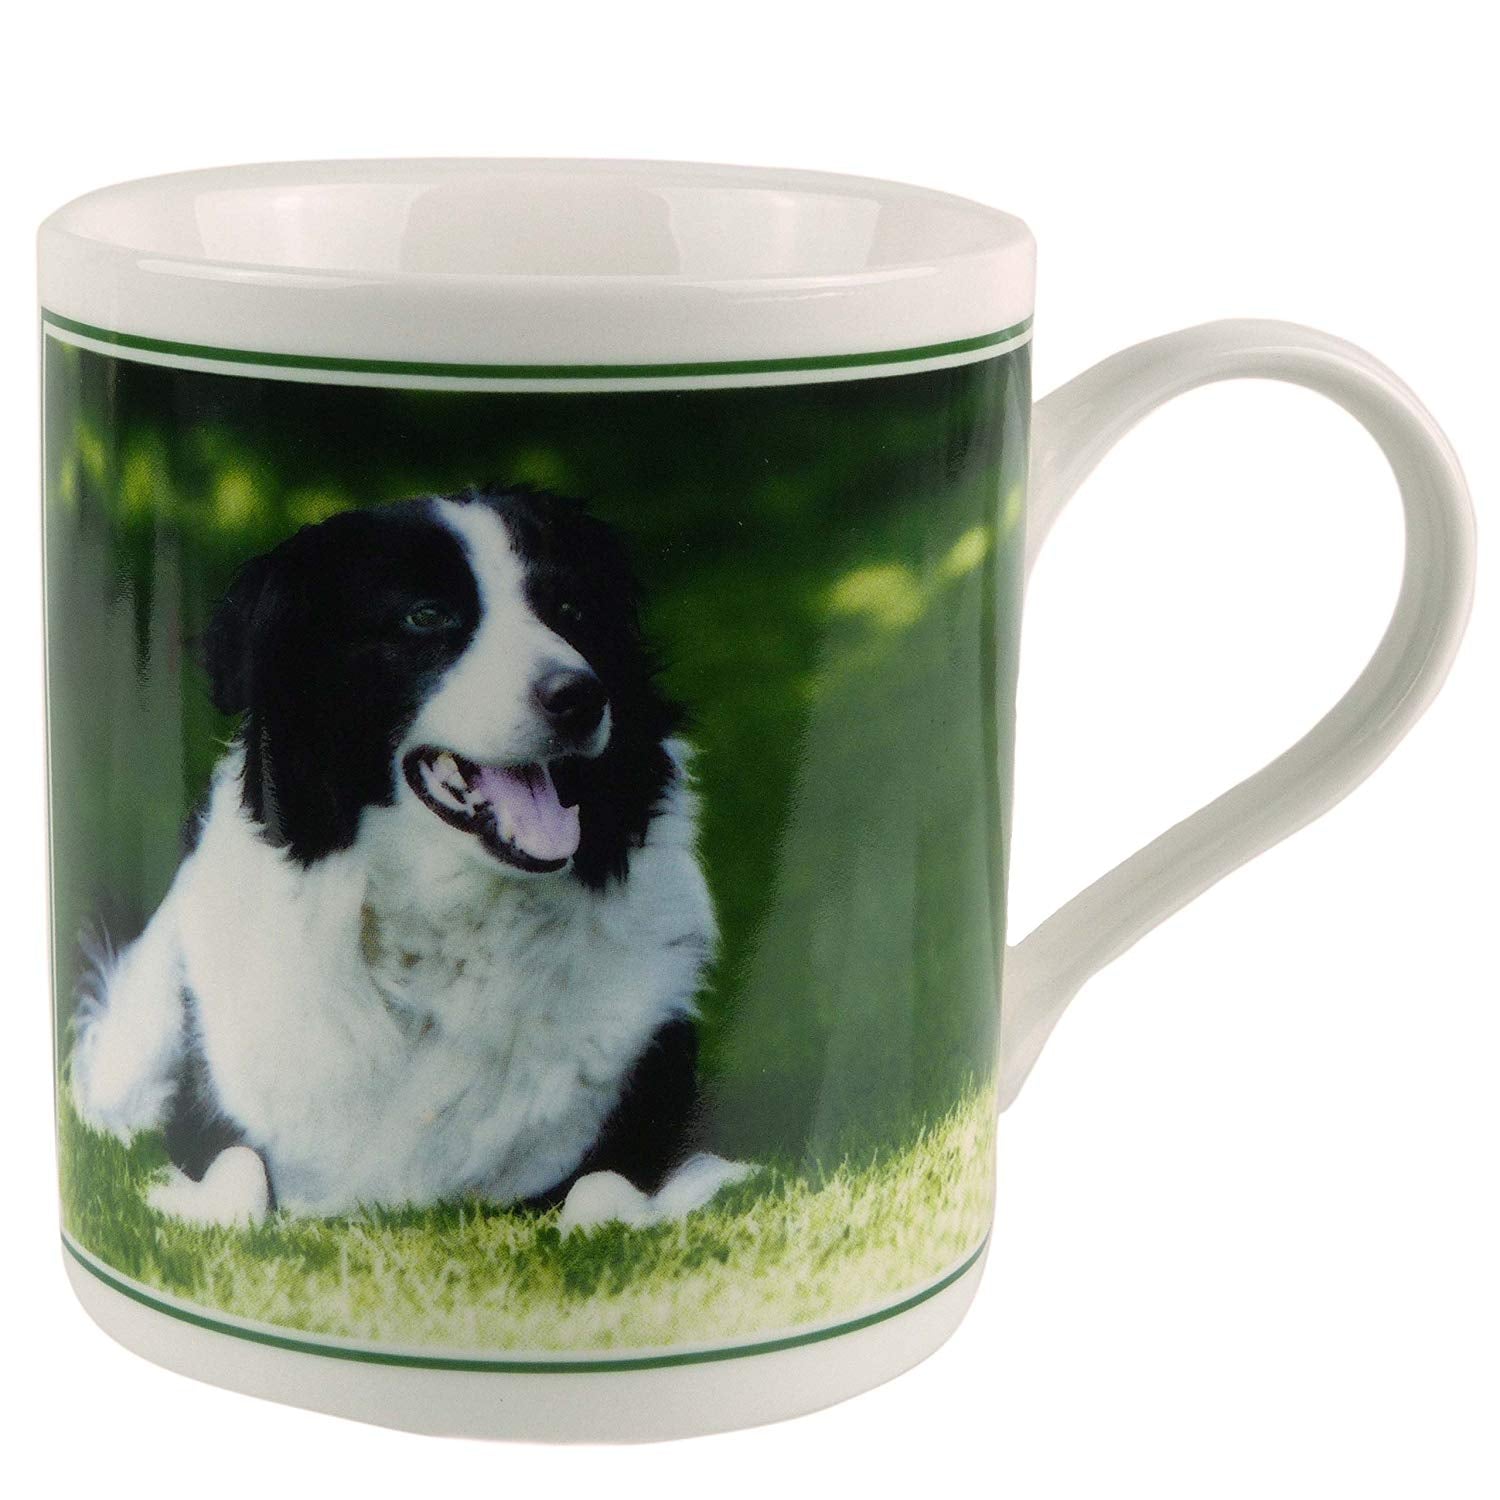 Fine China Collie MUG/CUP by Cachet Farmyard Collection Sheep Dog Gift Boxed - hanrattycraftsgifts.co.uk